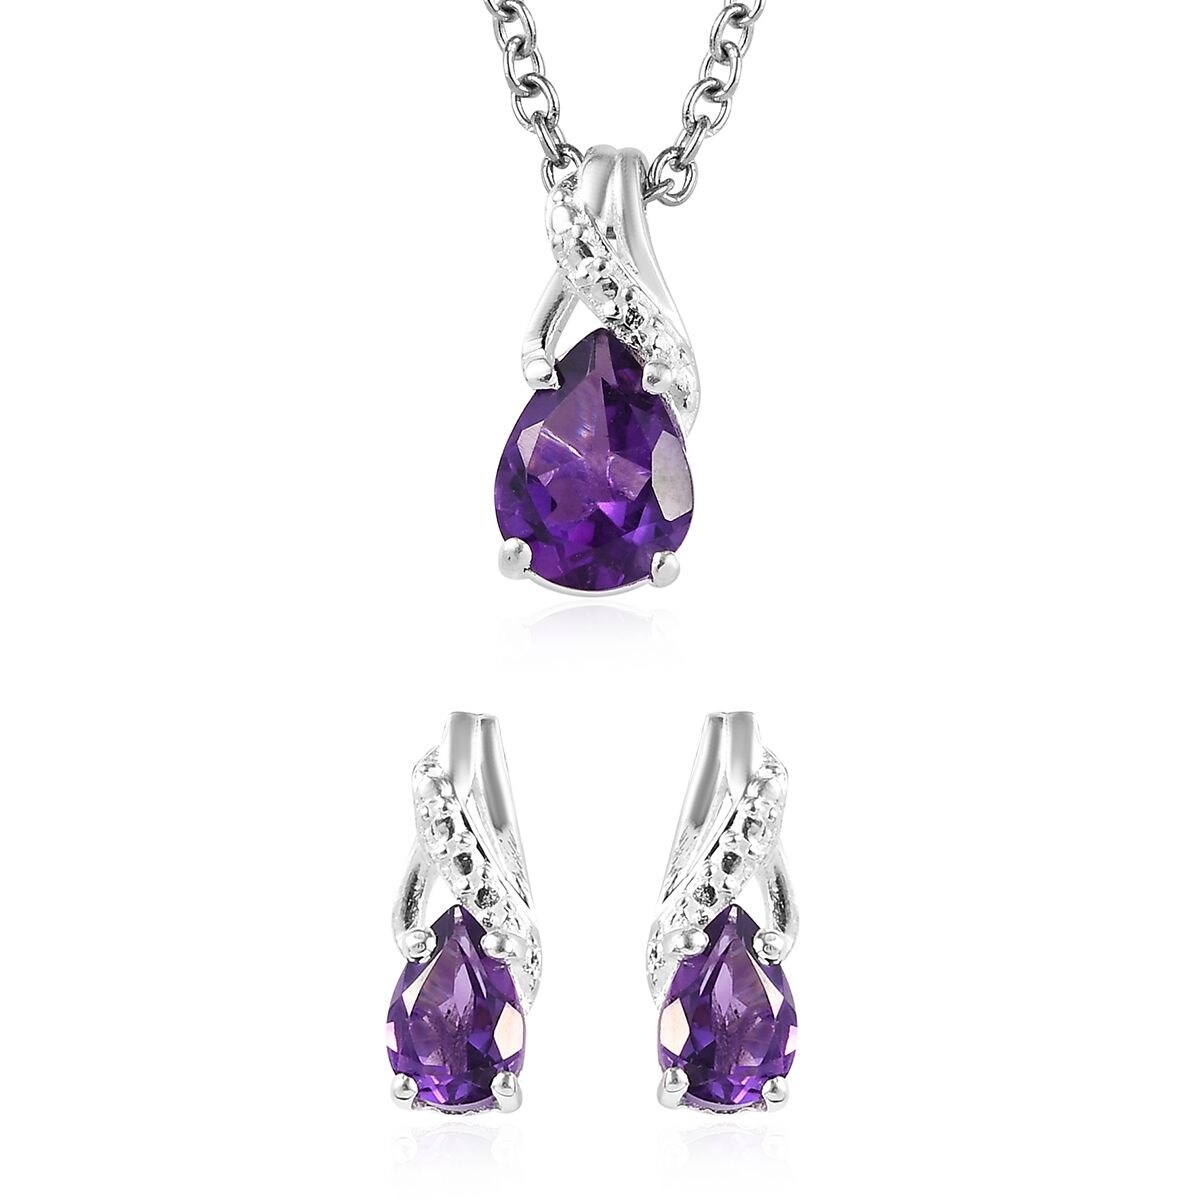 Free Shipping Amethyst 925 Silver Jewelry Handmade Jewelry Necklace-16-18''